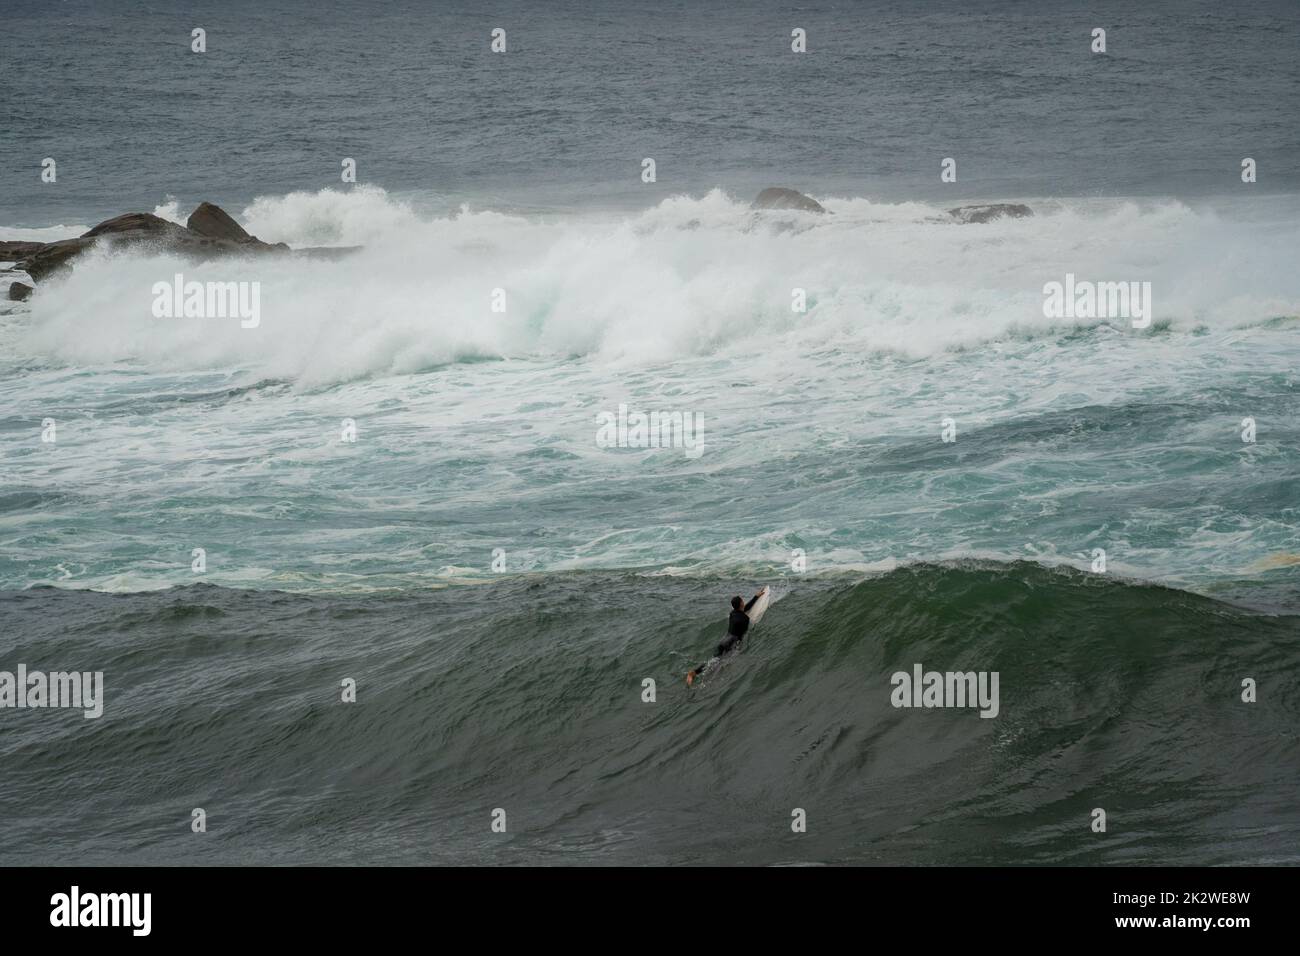 A scenic shot of a surfer catching a large wave at Wedding Cake Island, Sydney Stock Photo